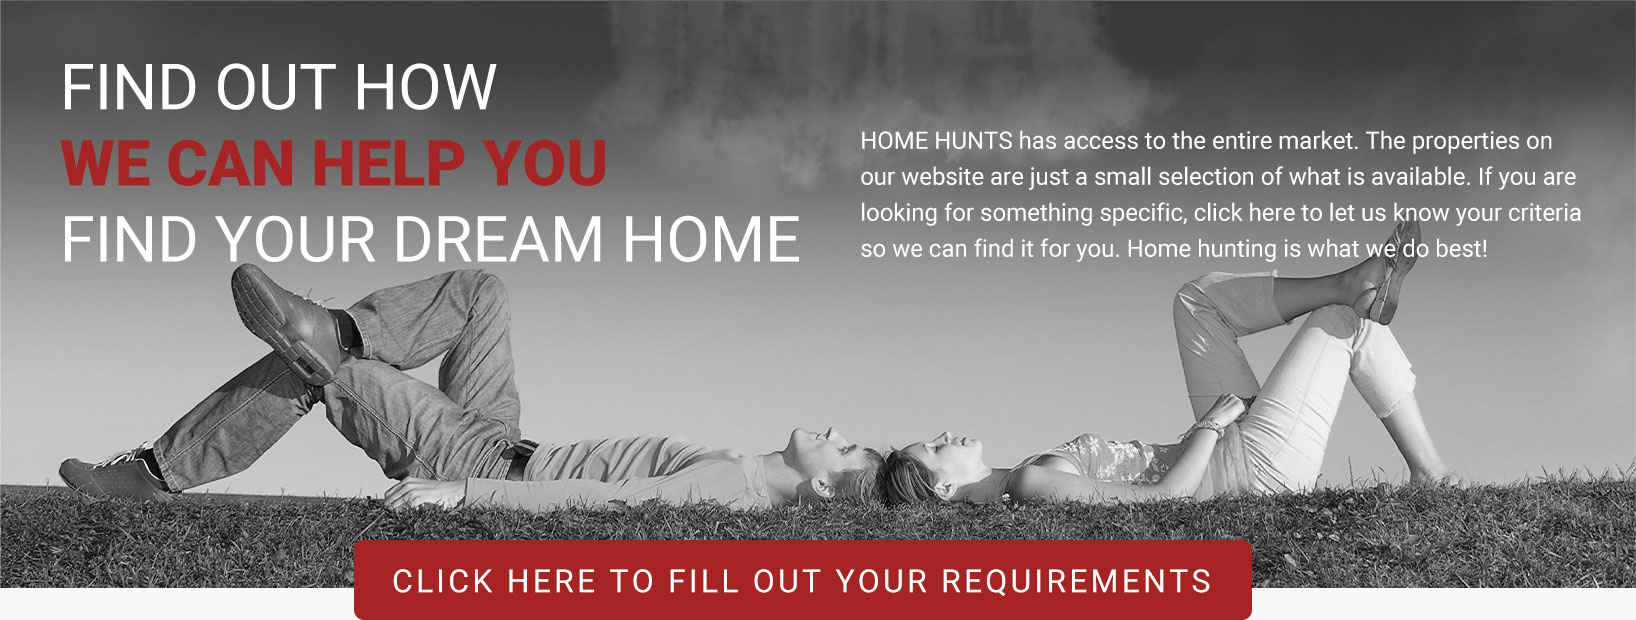 Find out how we can help you find your perfect home - Click Here